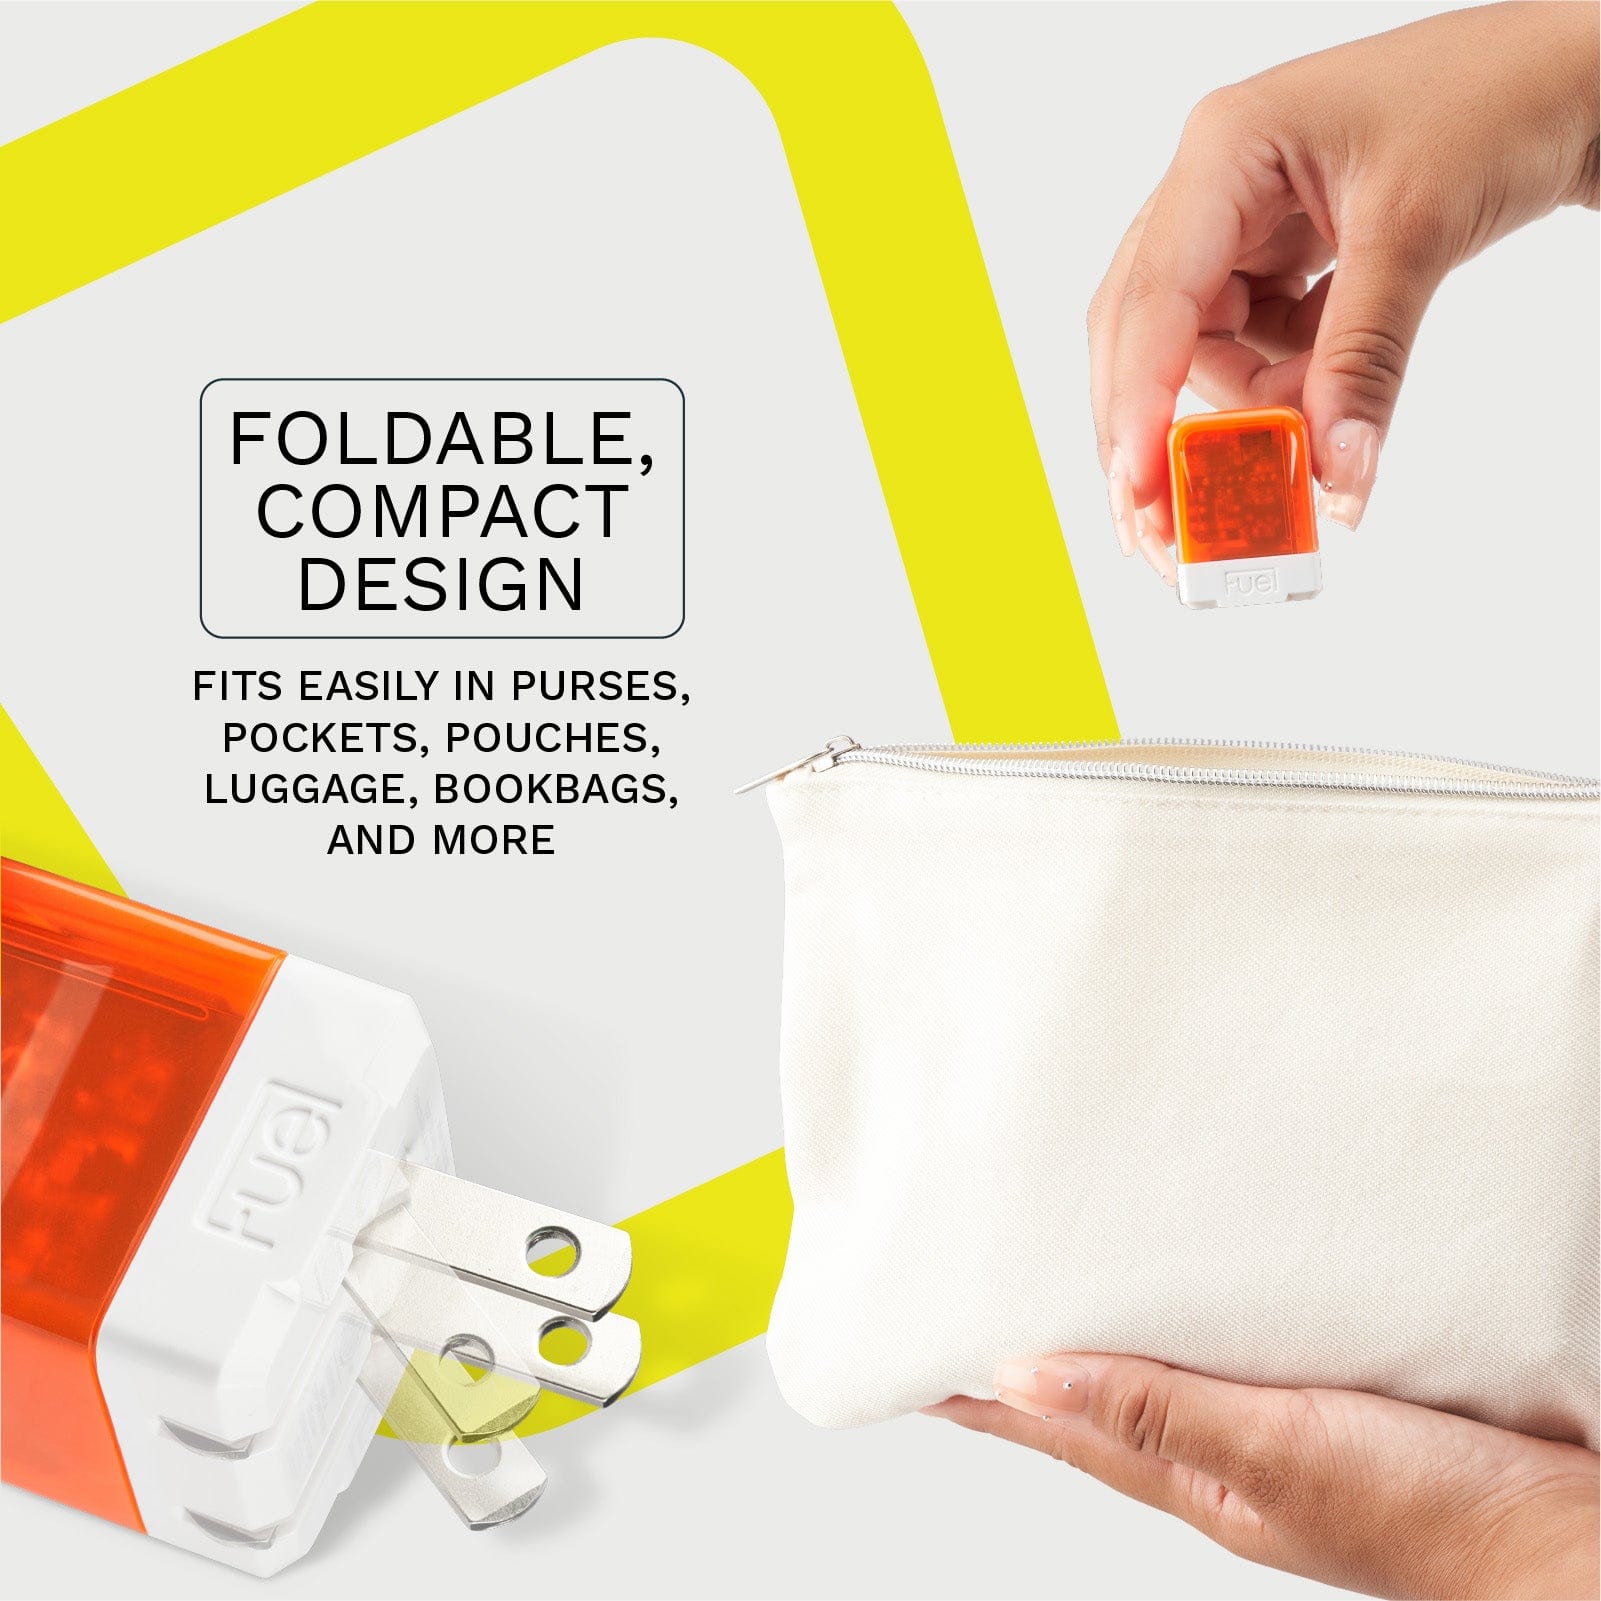 FOLDABLE, COMPACT DESIGN. FITS EASILY IN PURSES, POCKETS, POUCHES, LUGAGE, BOOKBAGS, AND MORE. 